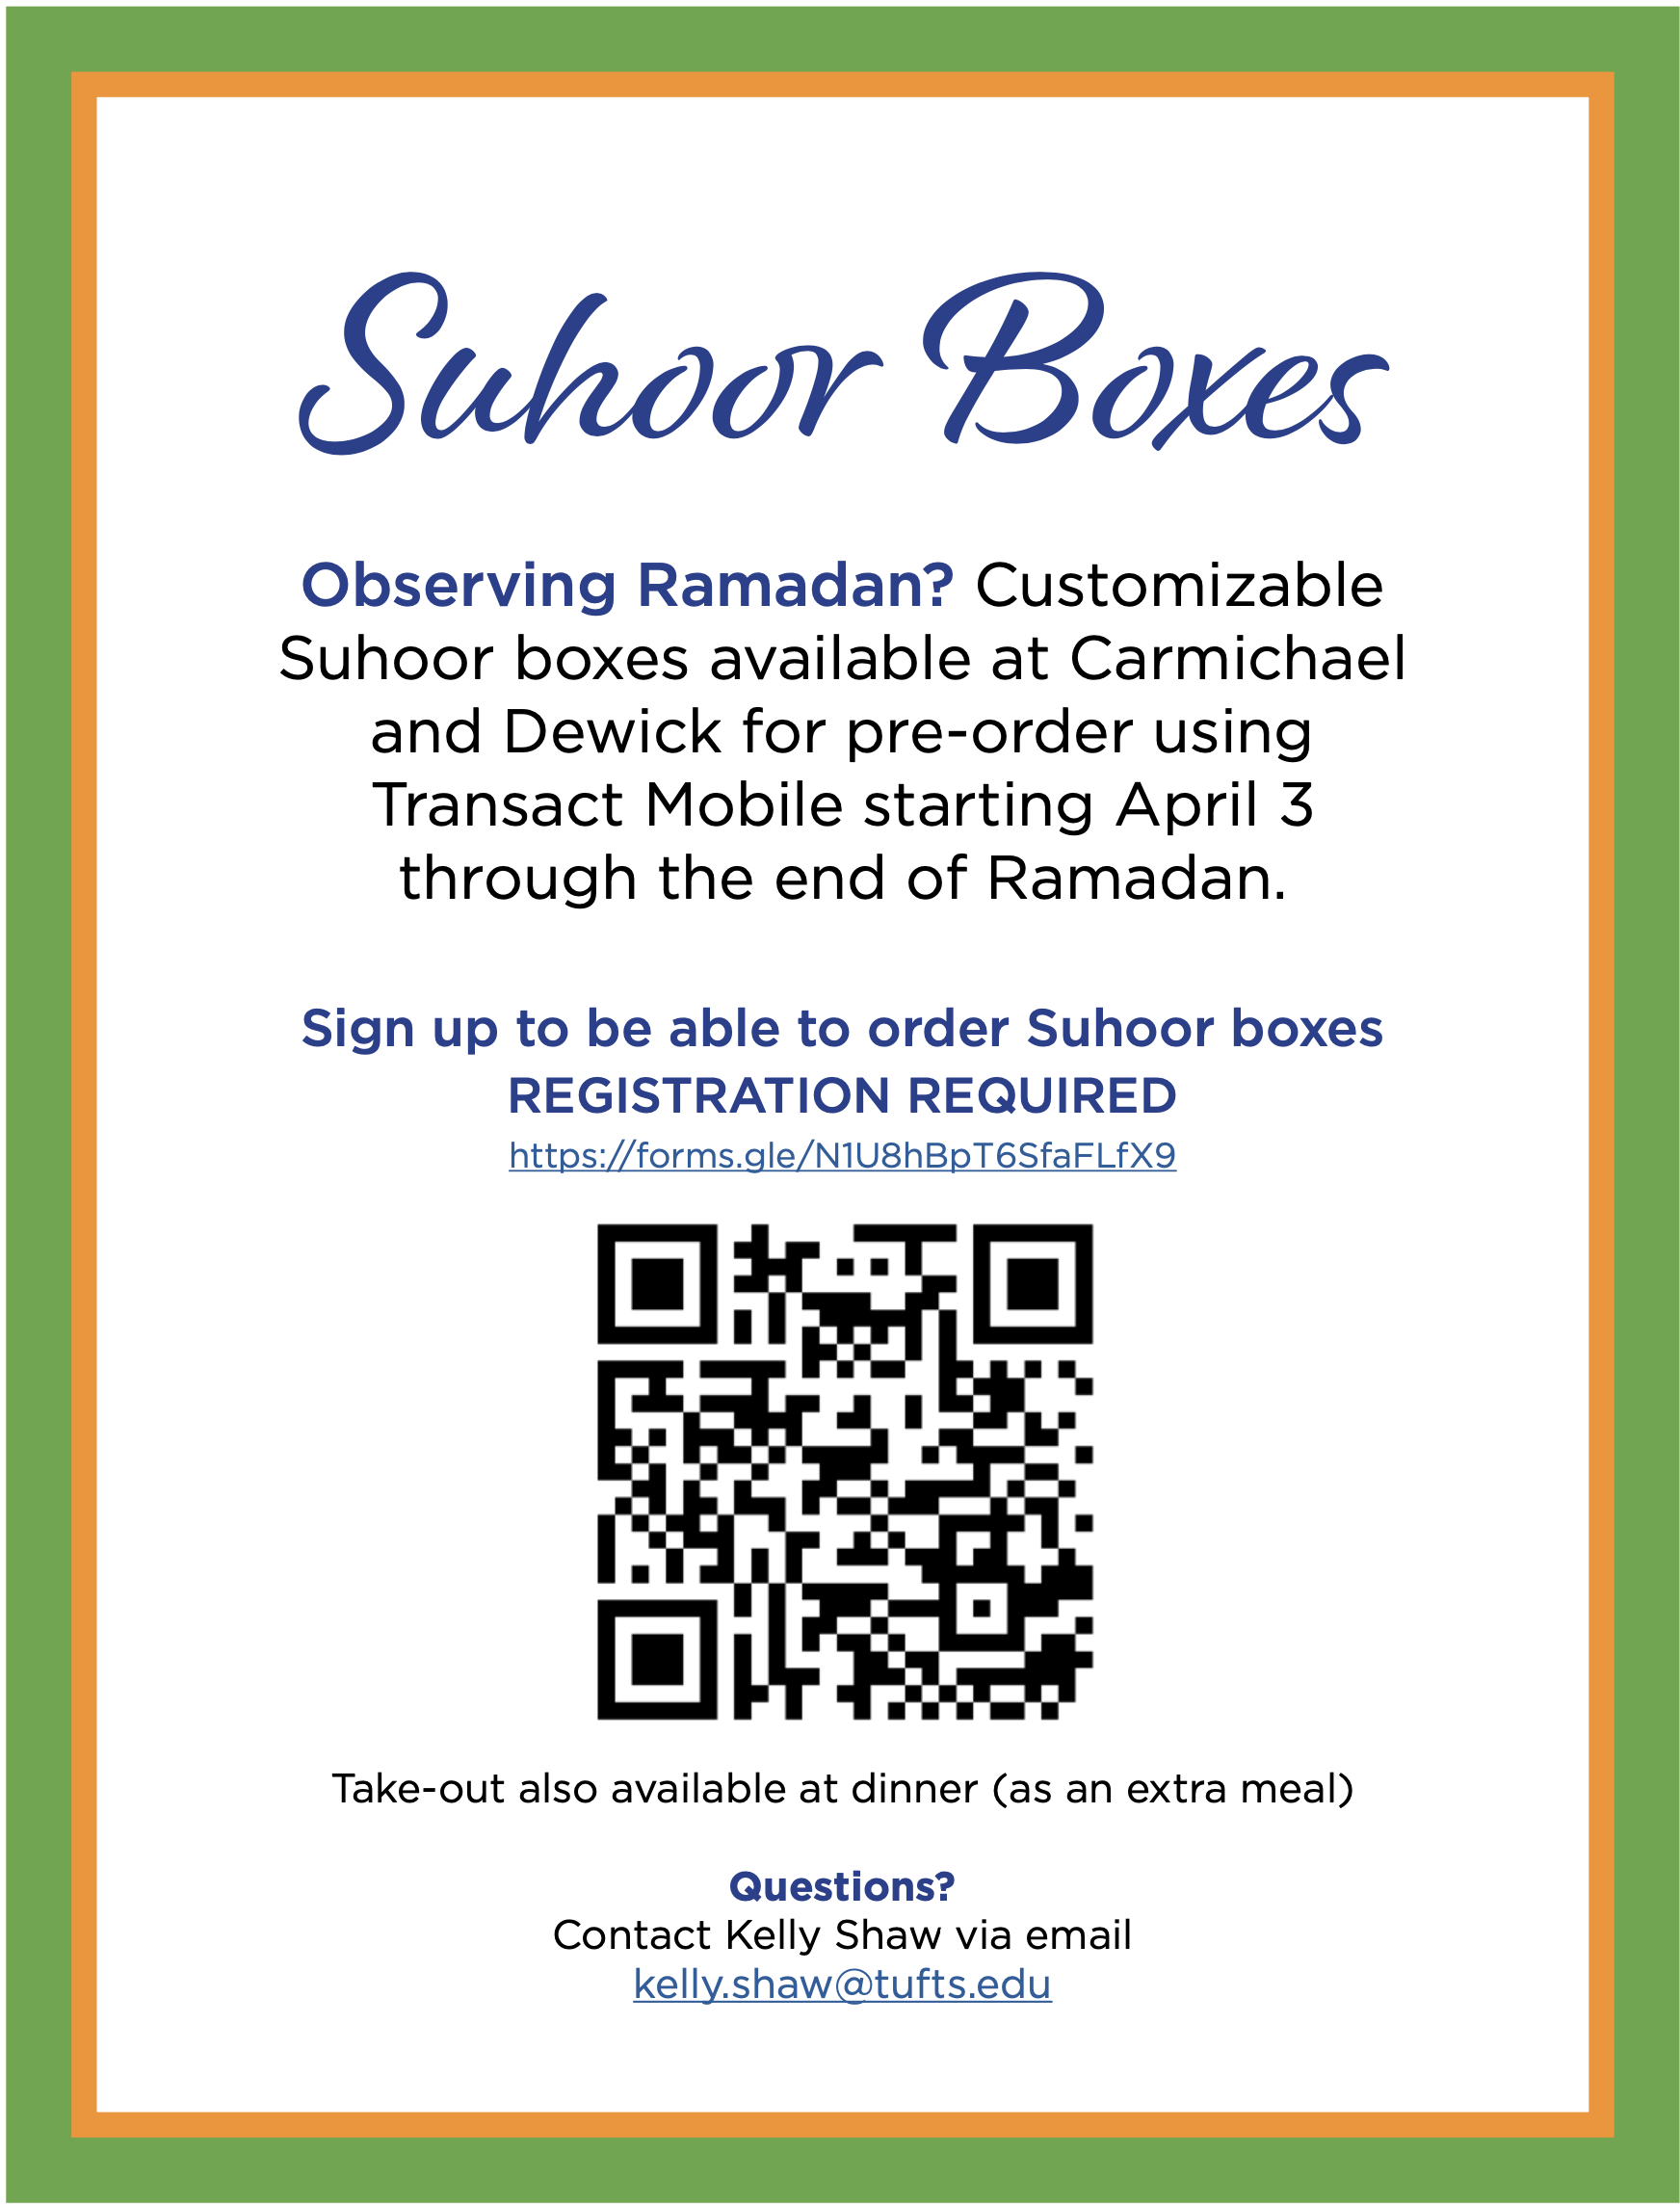 Suhoor Boxes sign up